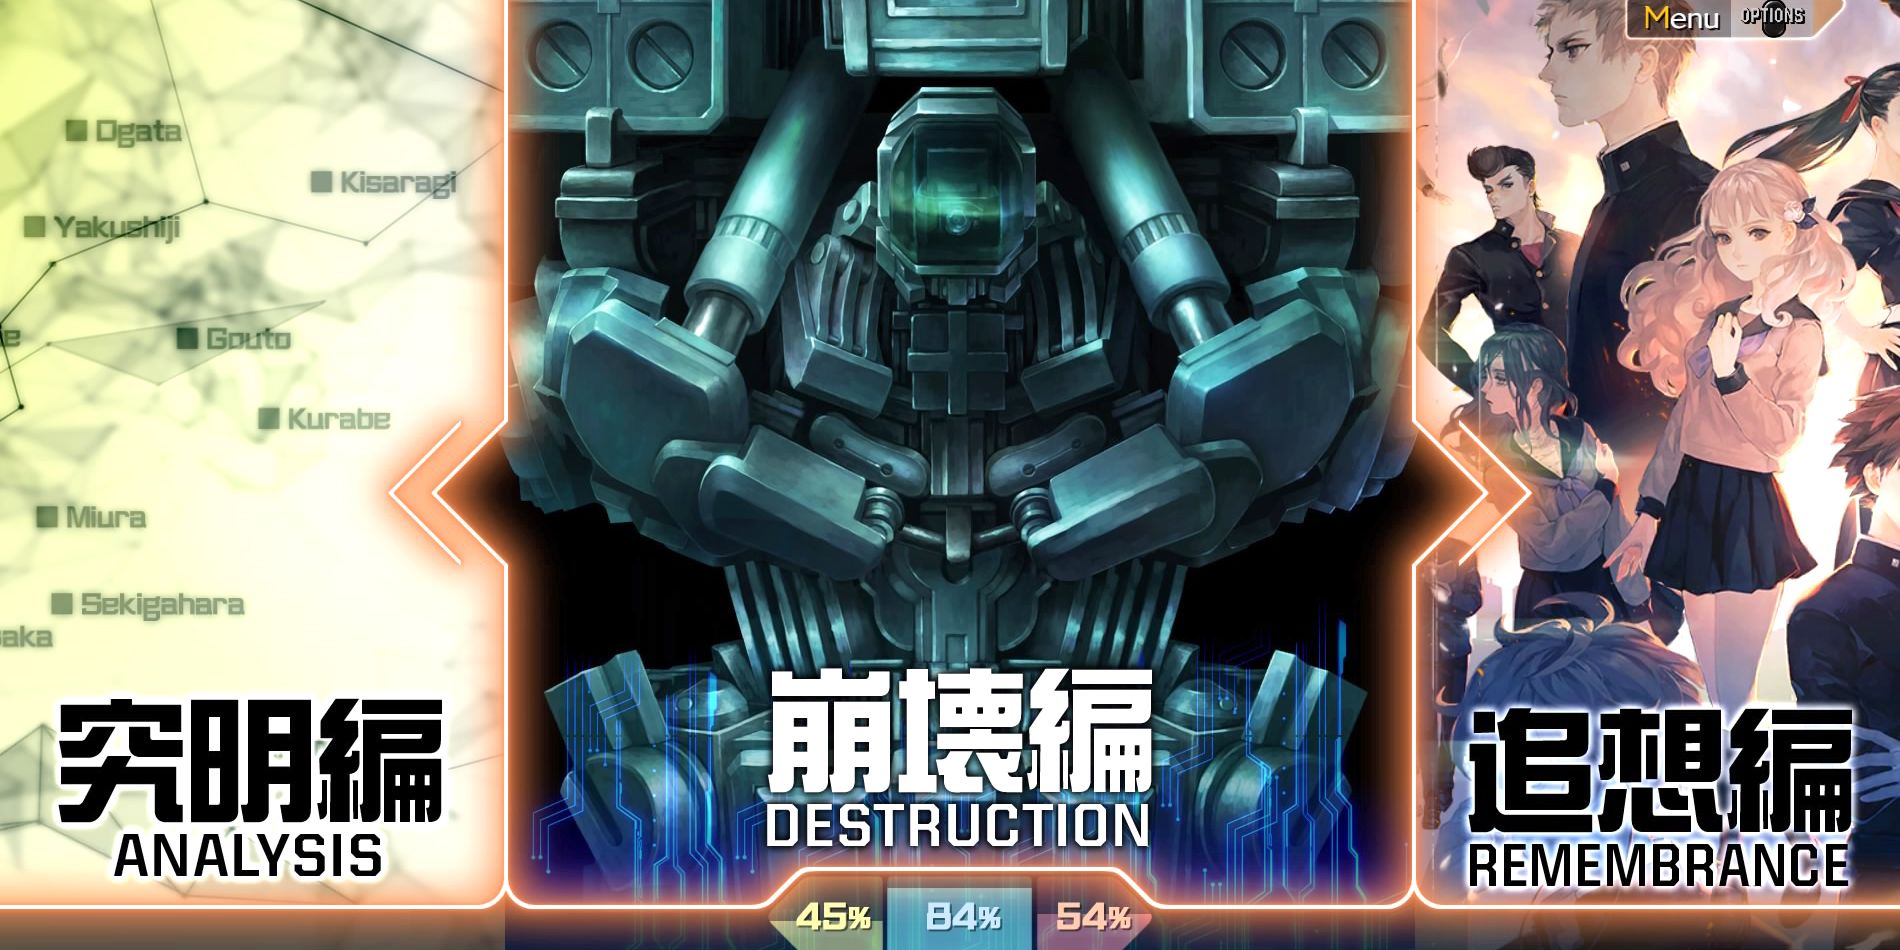 Destruction-first-can-open-up-Analysis-faster-in-13-Sentinels-Aegis-Rim.jpg